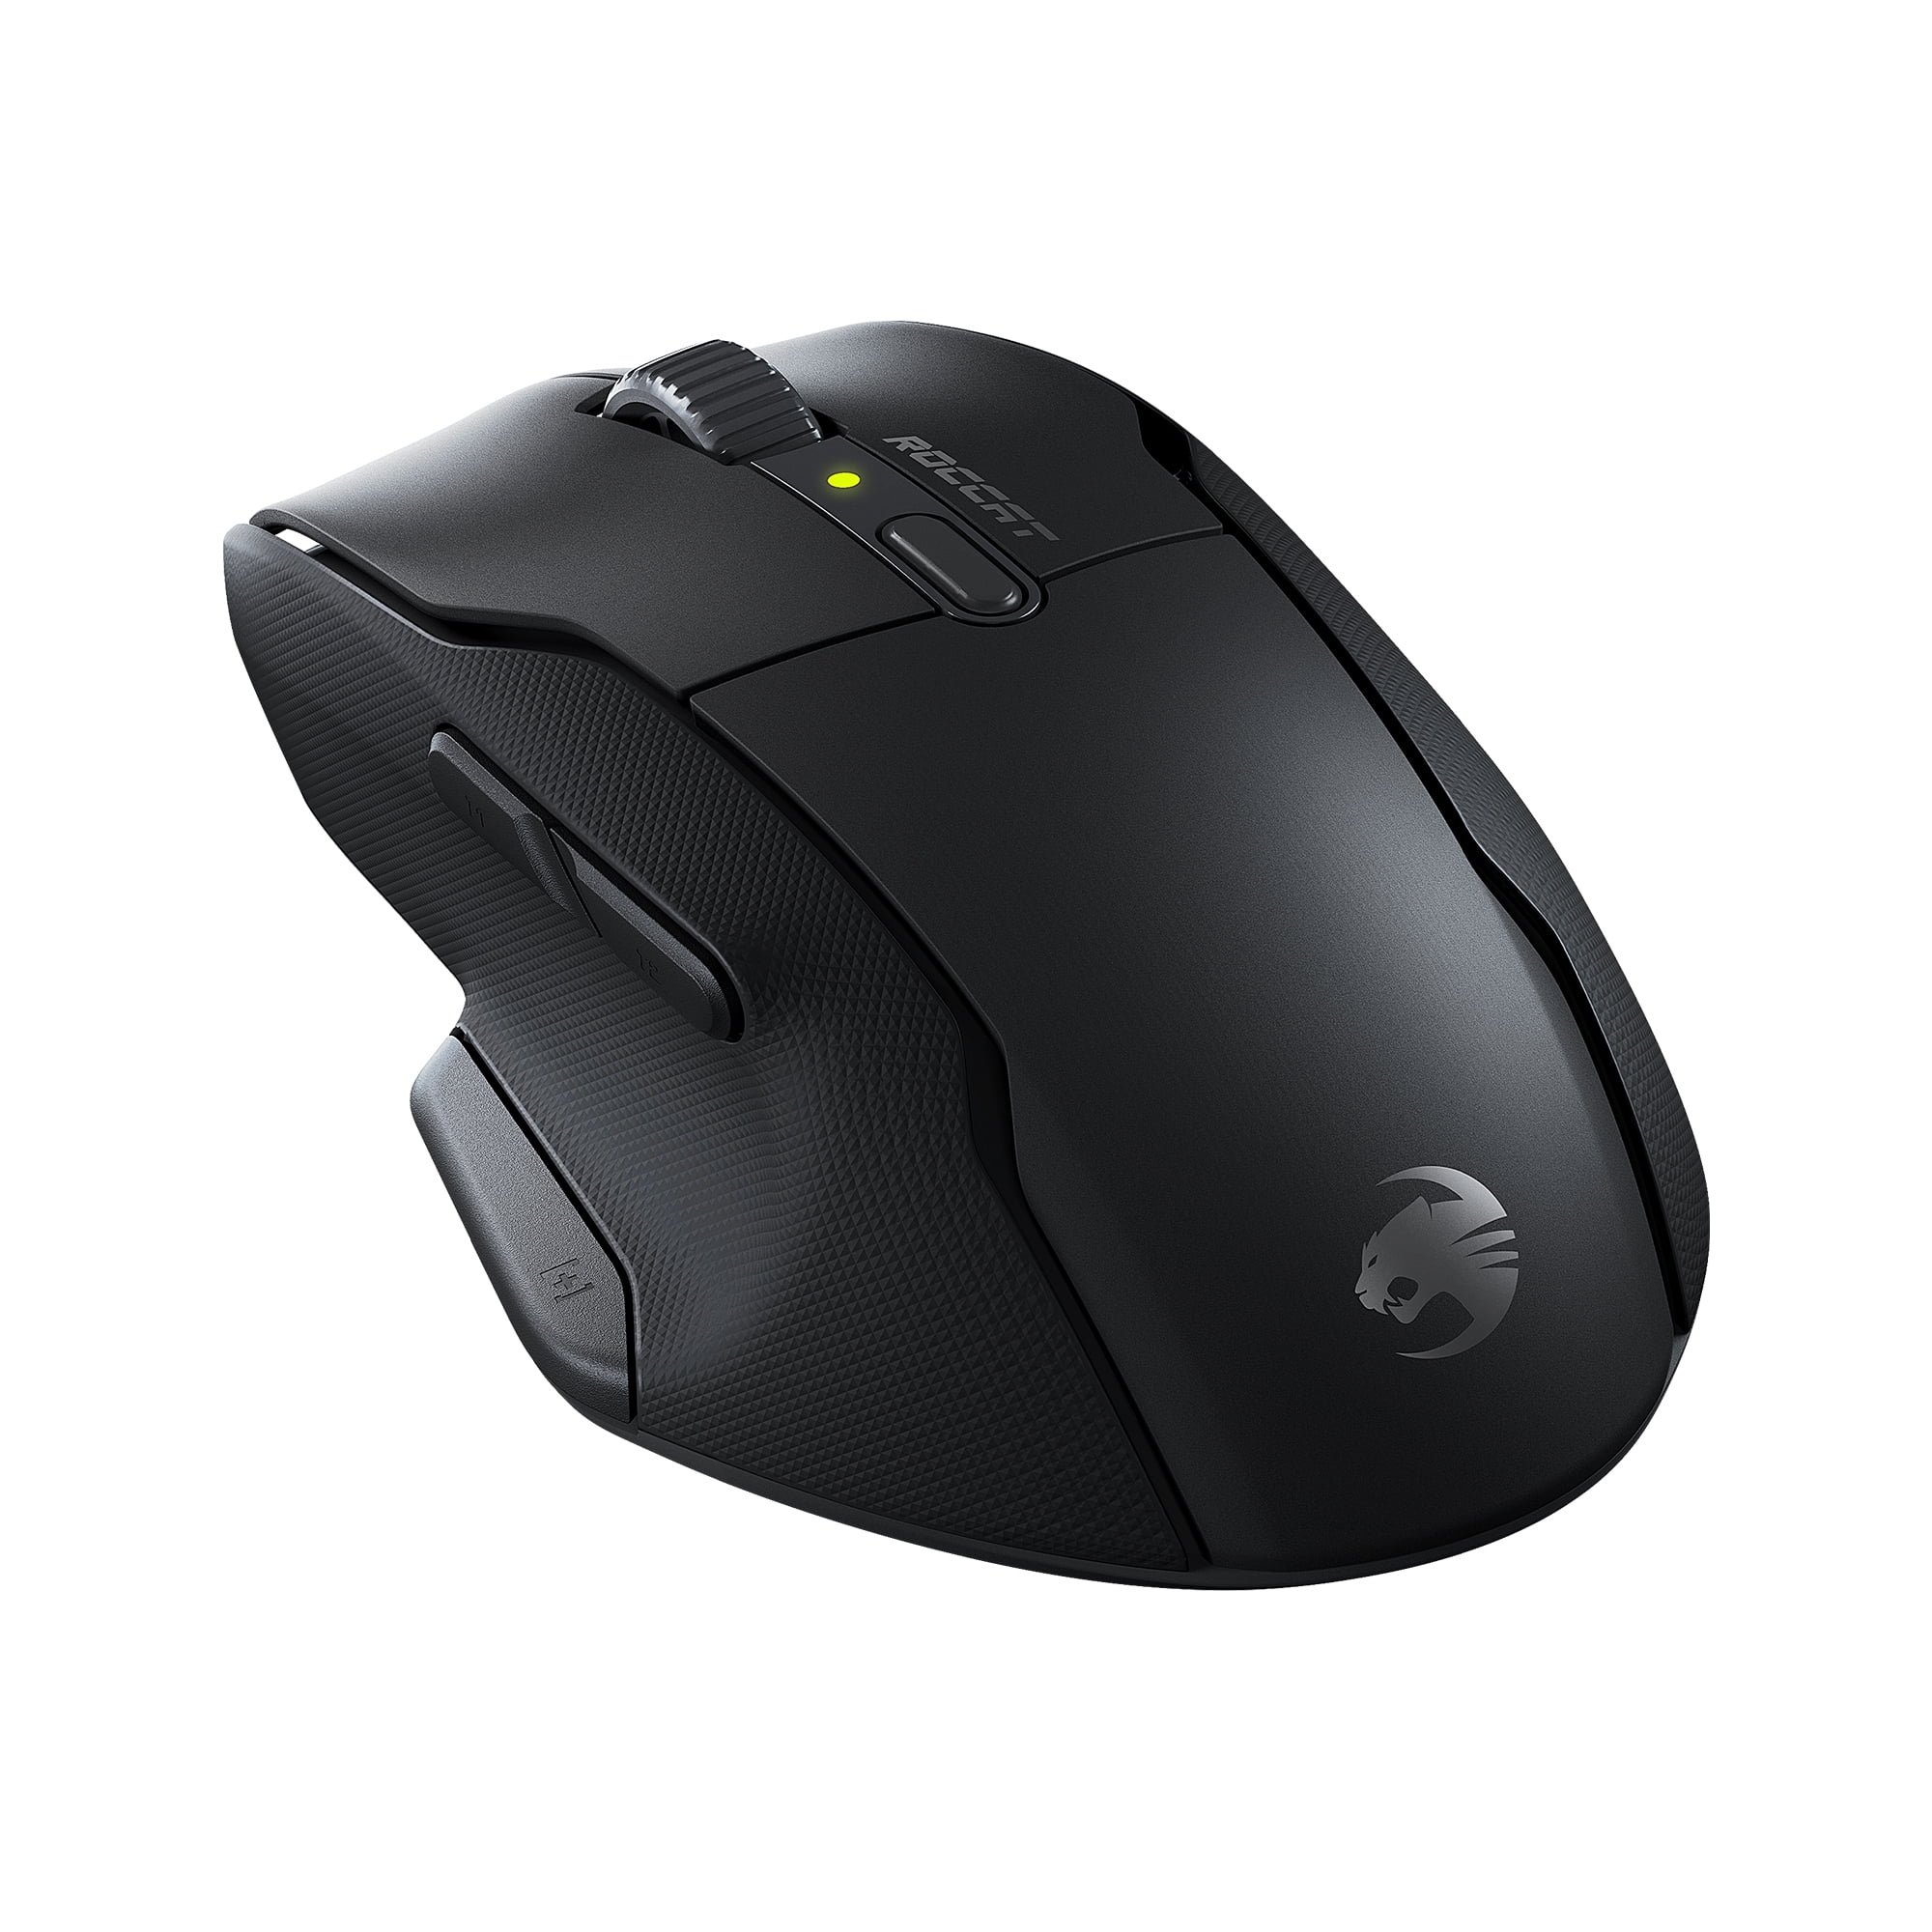 Rubber Ergonomic Grips, 19K Wireless - Button Switches 800-hour Design With Side Optical Black & Programmable Sensor, Kone Life, Double-Injected Air ROCCAT Titan - DPI Mouse Gaming Battery Optical